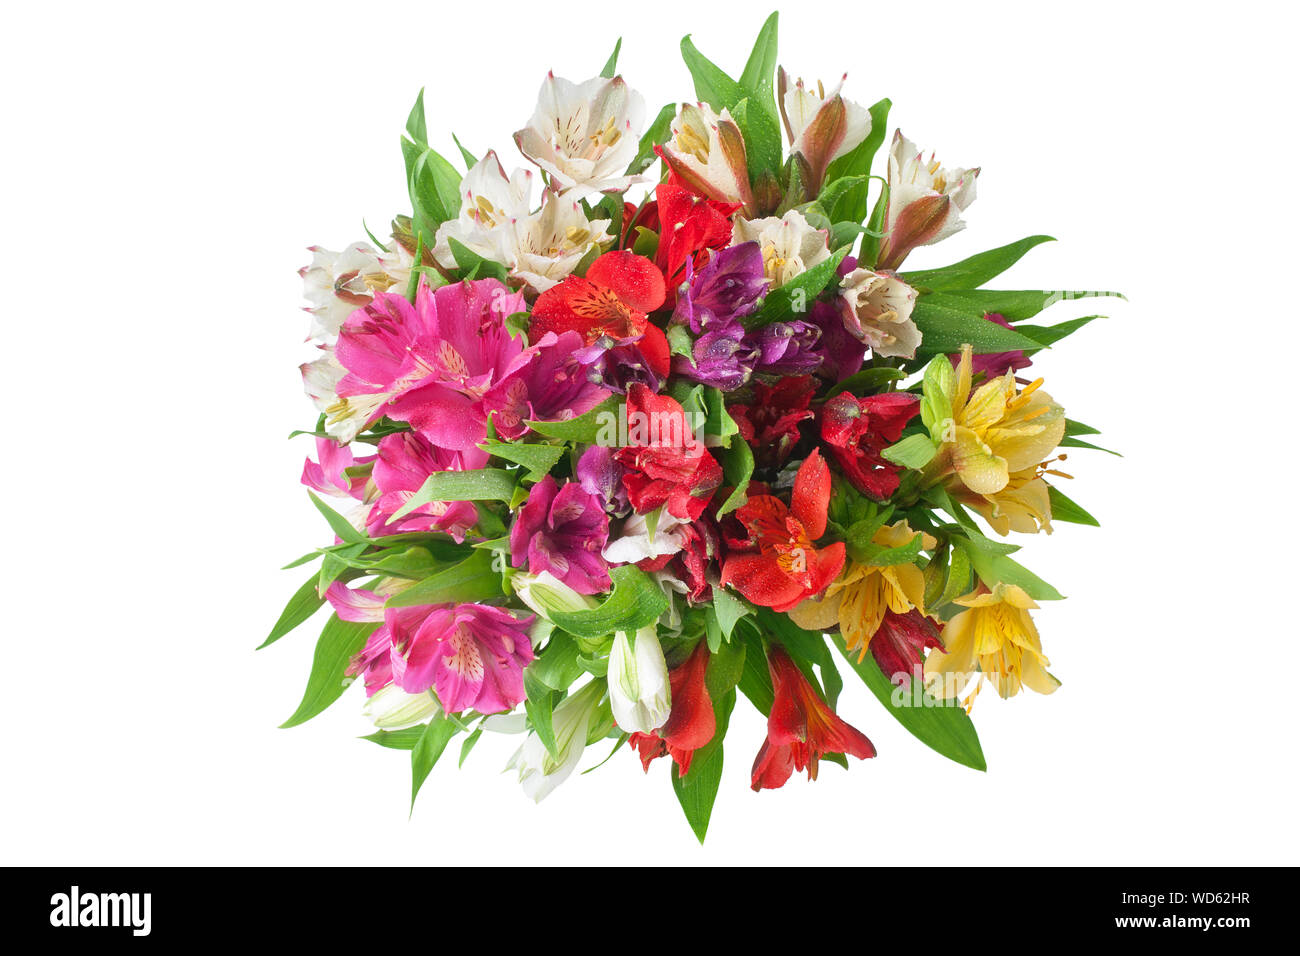 Multicolored alstroemeria flowers round bouquet on white background isolated closeup, lily flower bunches for holiday poster decorative design element Stock Photo